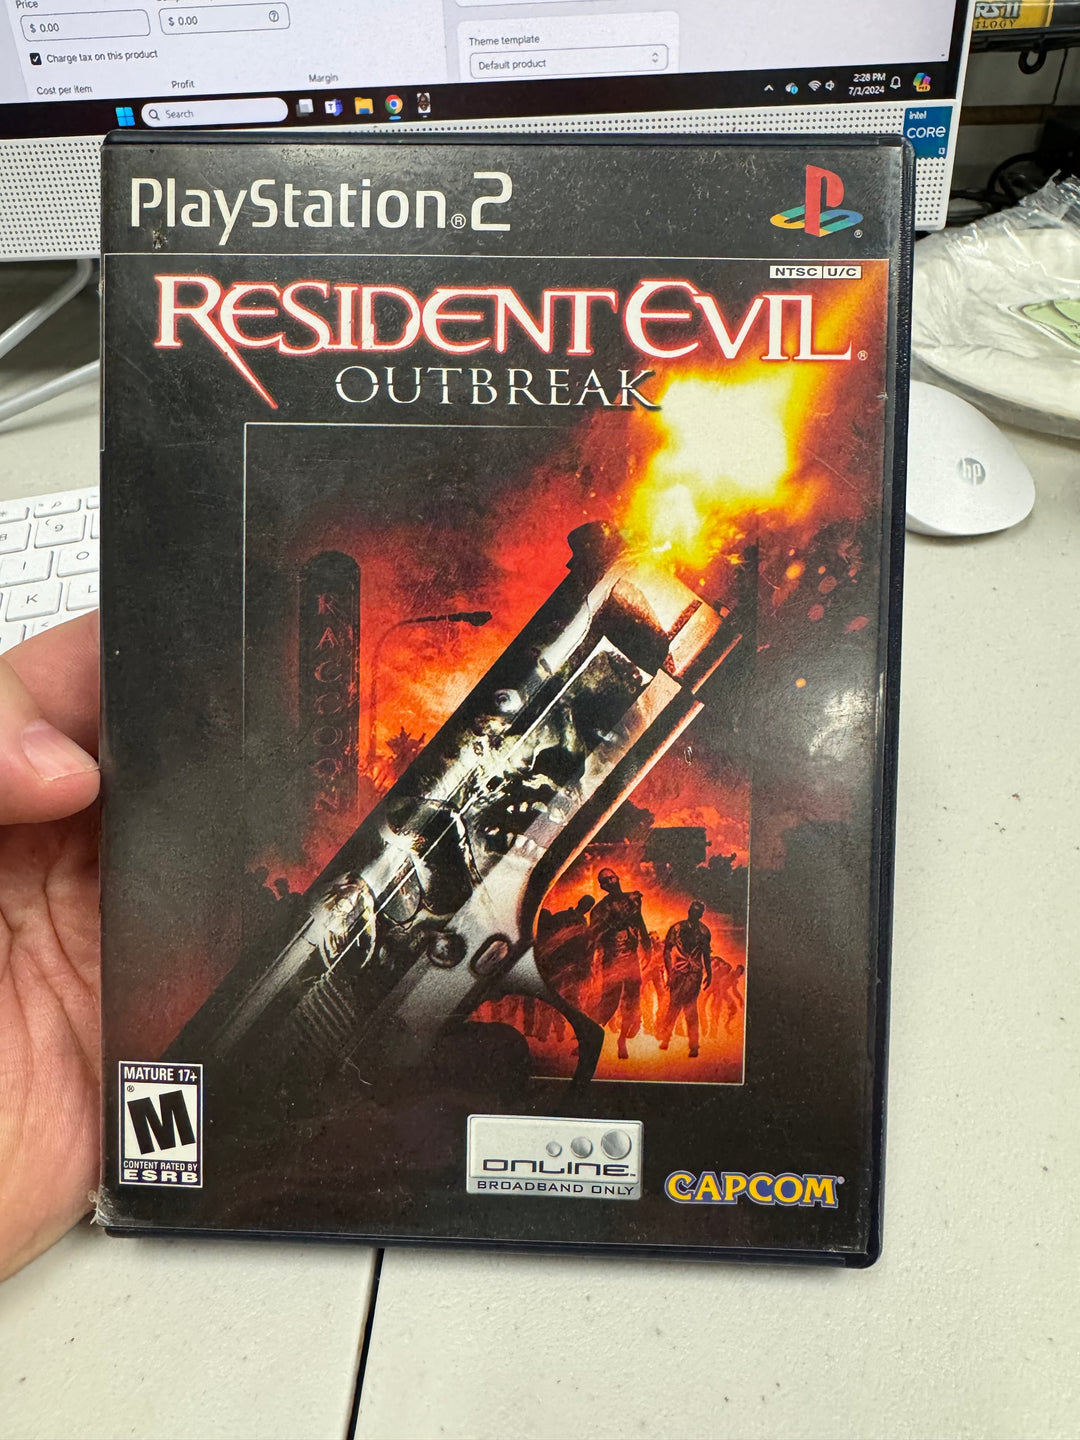 NO GAME (Case and Manual ONLY) Resident Evil Outbreak-PS2 Playstation 2 m7124